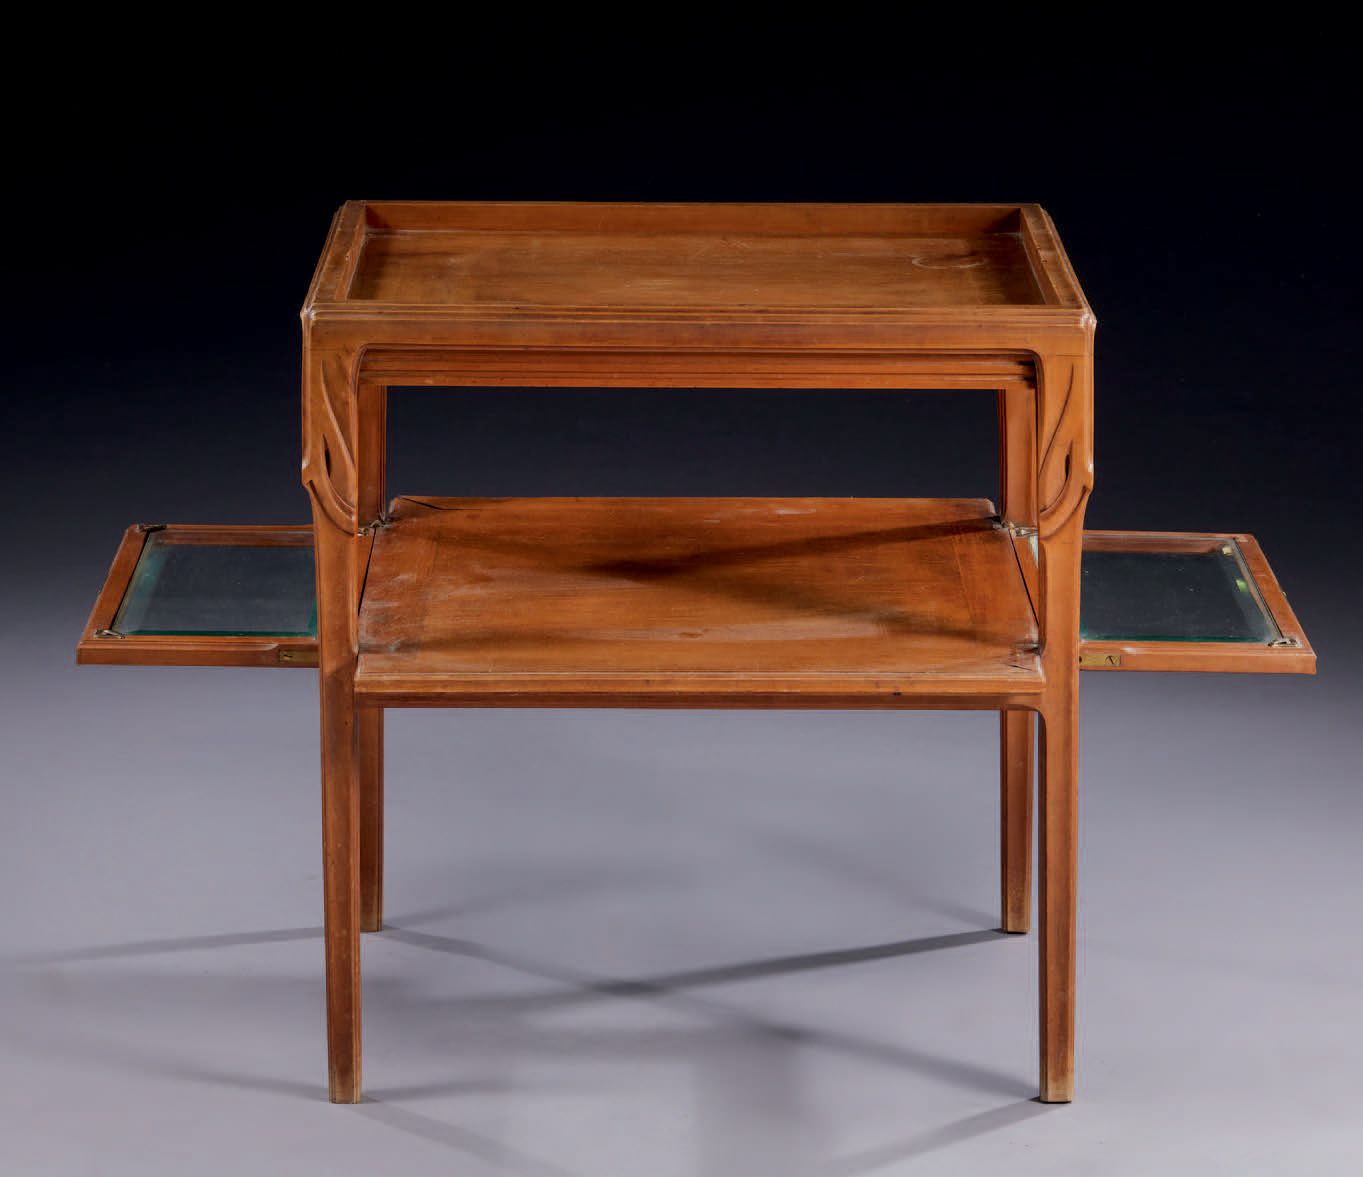 Maurice DUFRÊNE (1876-1955) 
Carved moulded wood display table with two superimp&hellip;